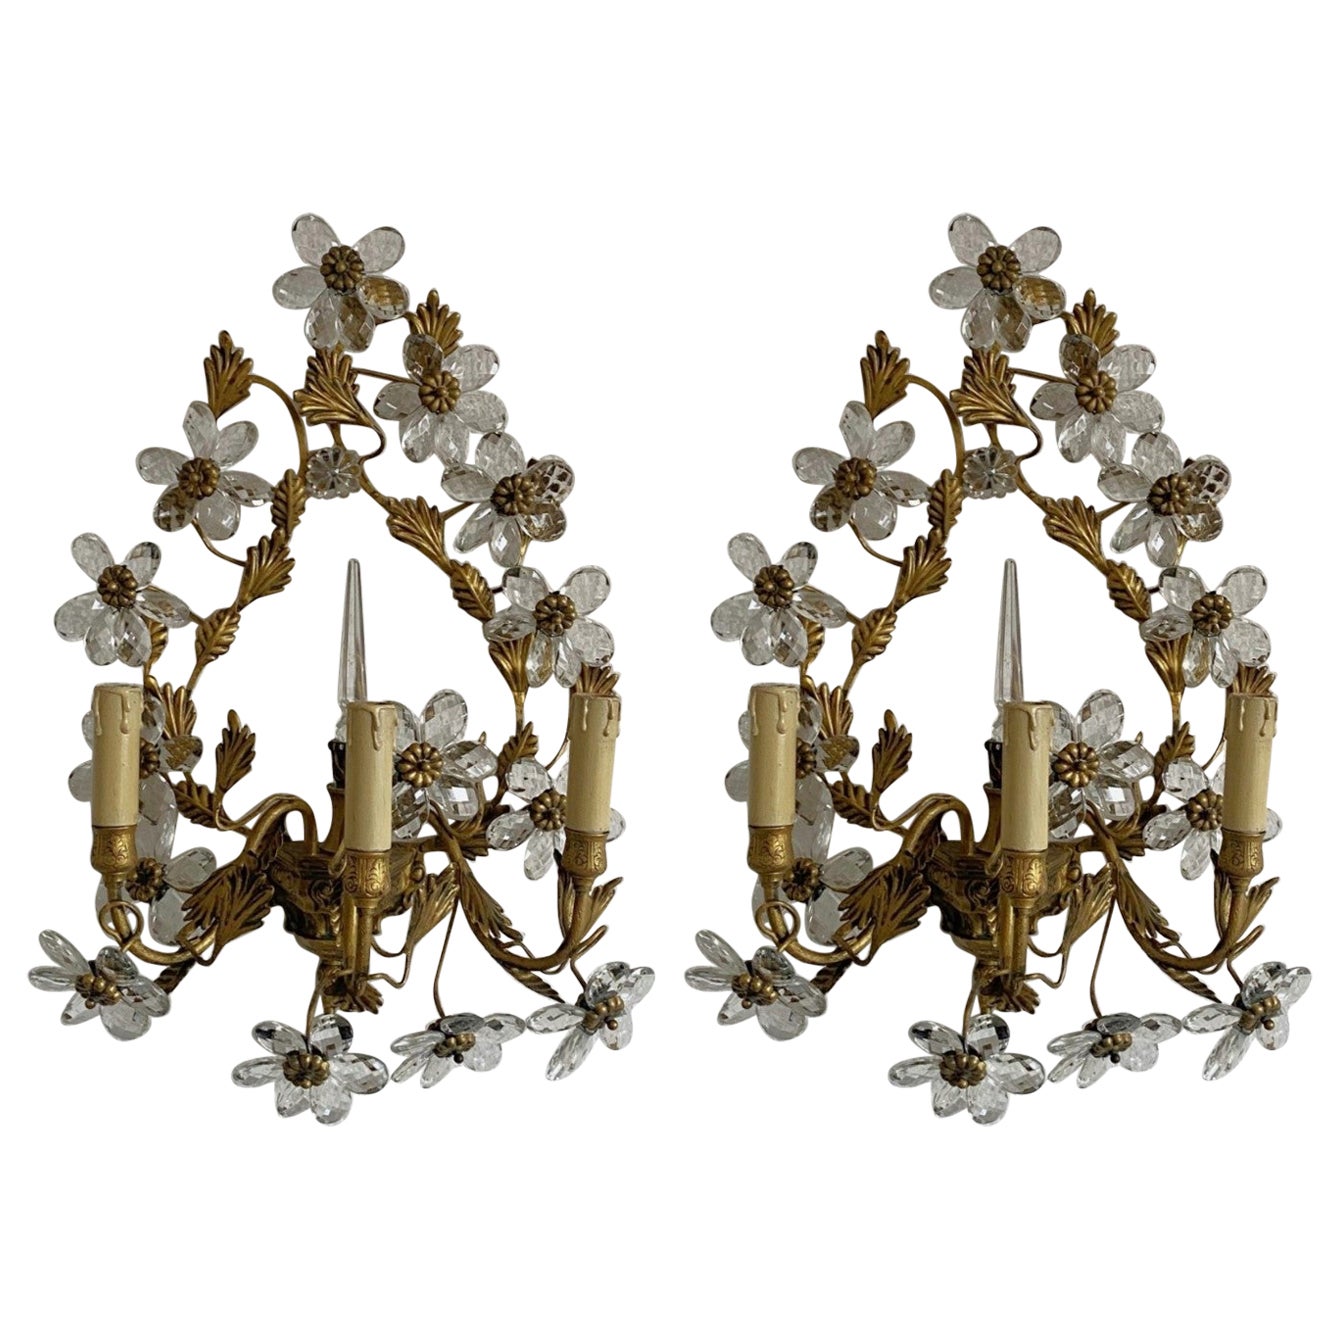 Pair of Large Maison Baguès Wrought Iron Crystal Flower Wall Sconces, 1930s For Sale